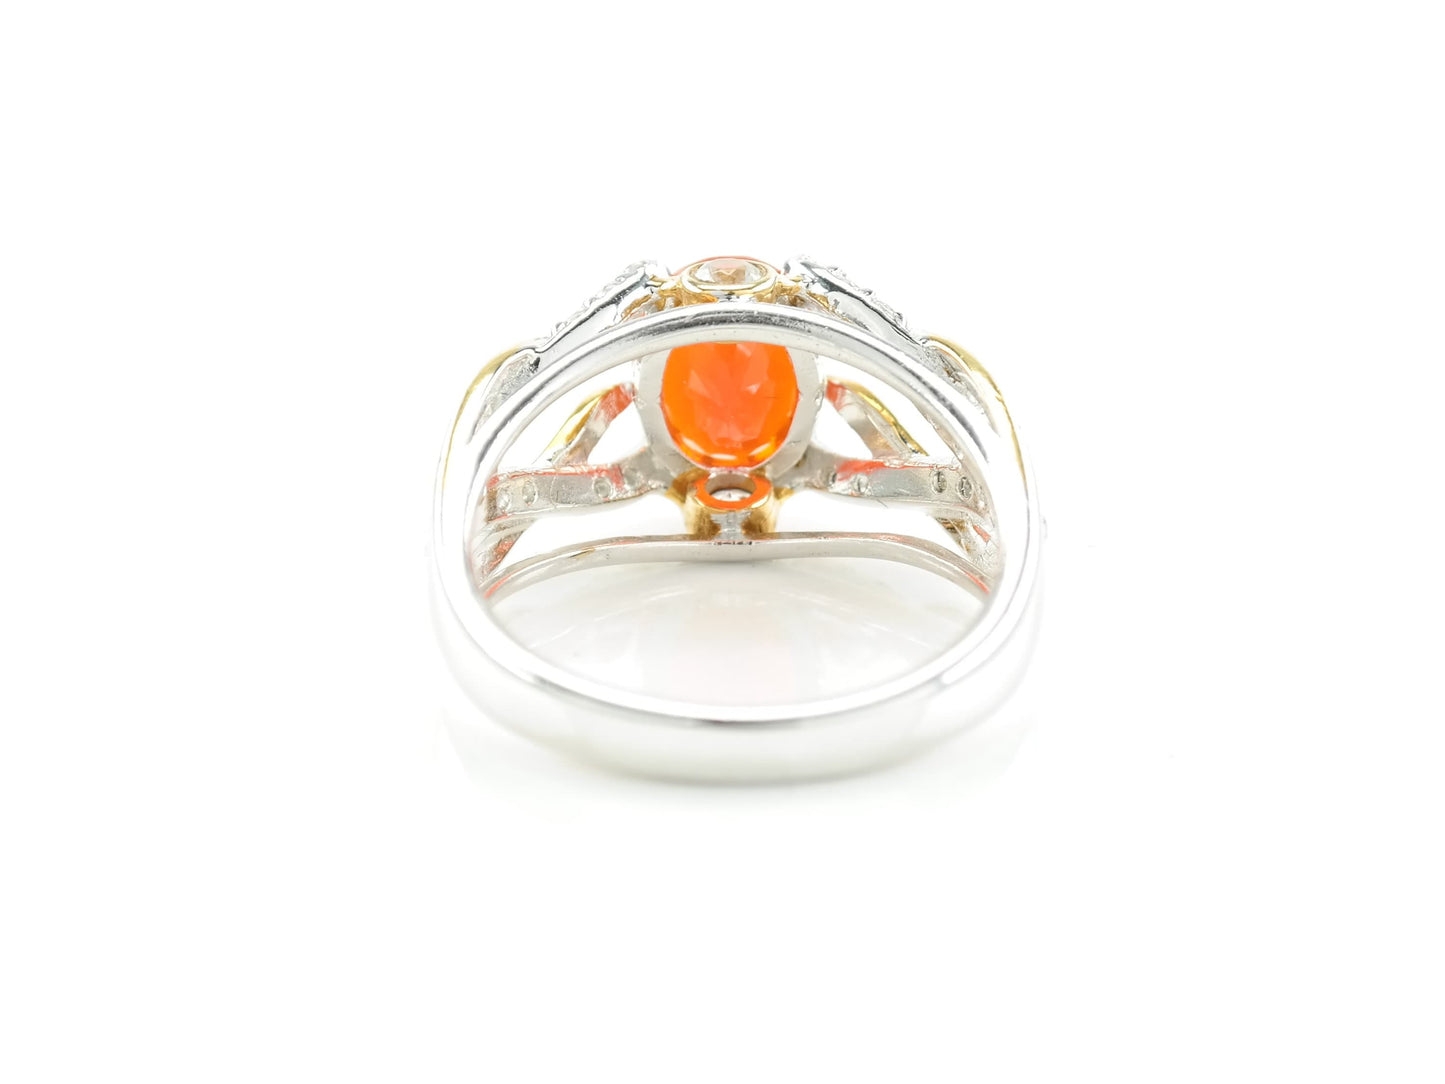 Vintage Sterling Silver Ring Fire Opal Gold Plated Orange Size 7